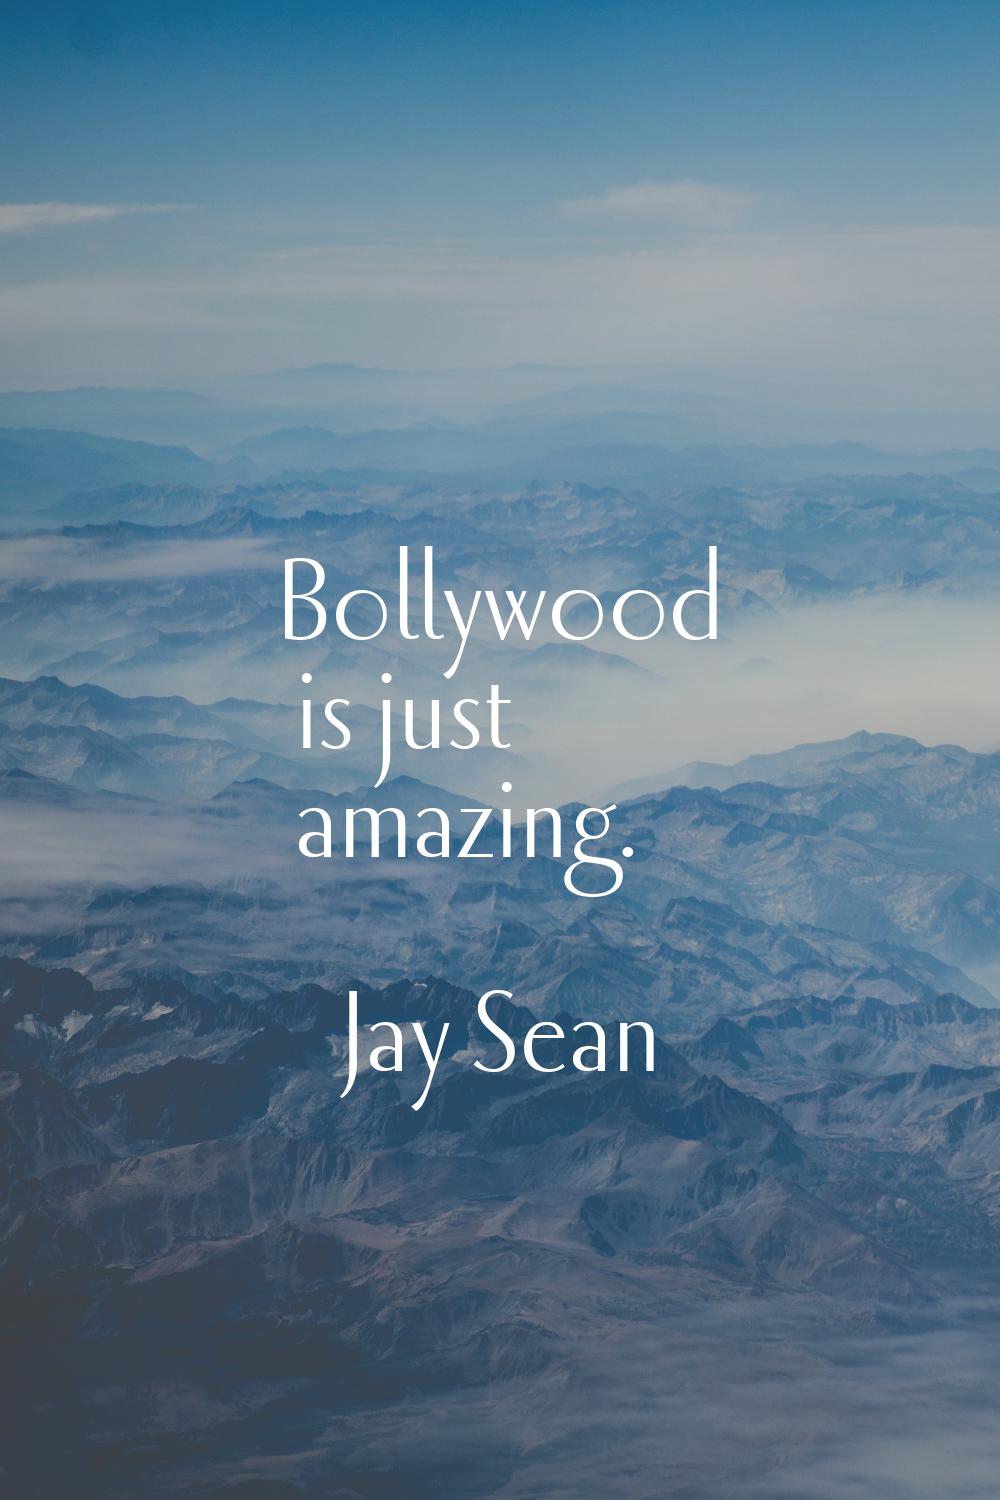 Bollywood is just amazing.